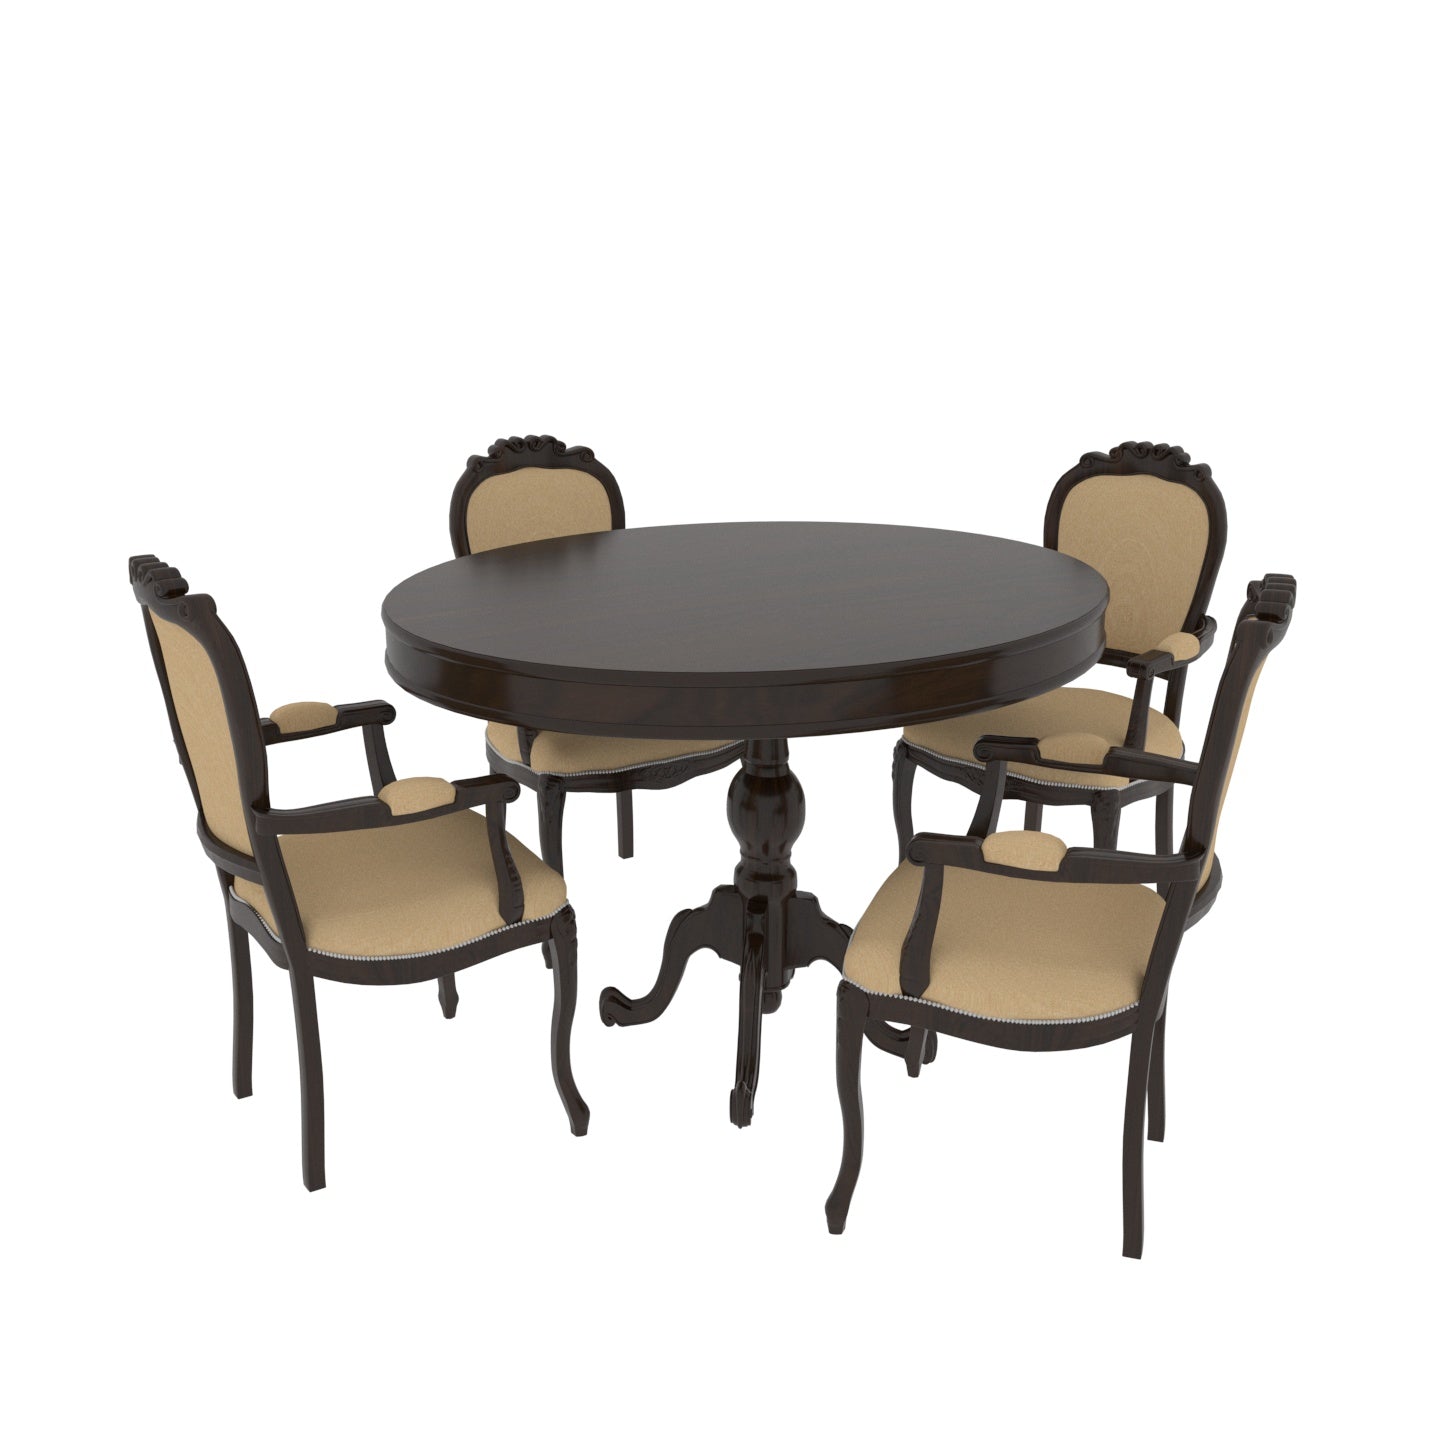 Retro Style Four Chair Round Table Complete Dining set Dining Set